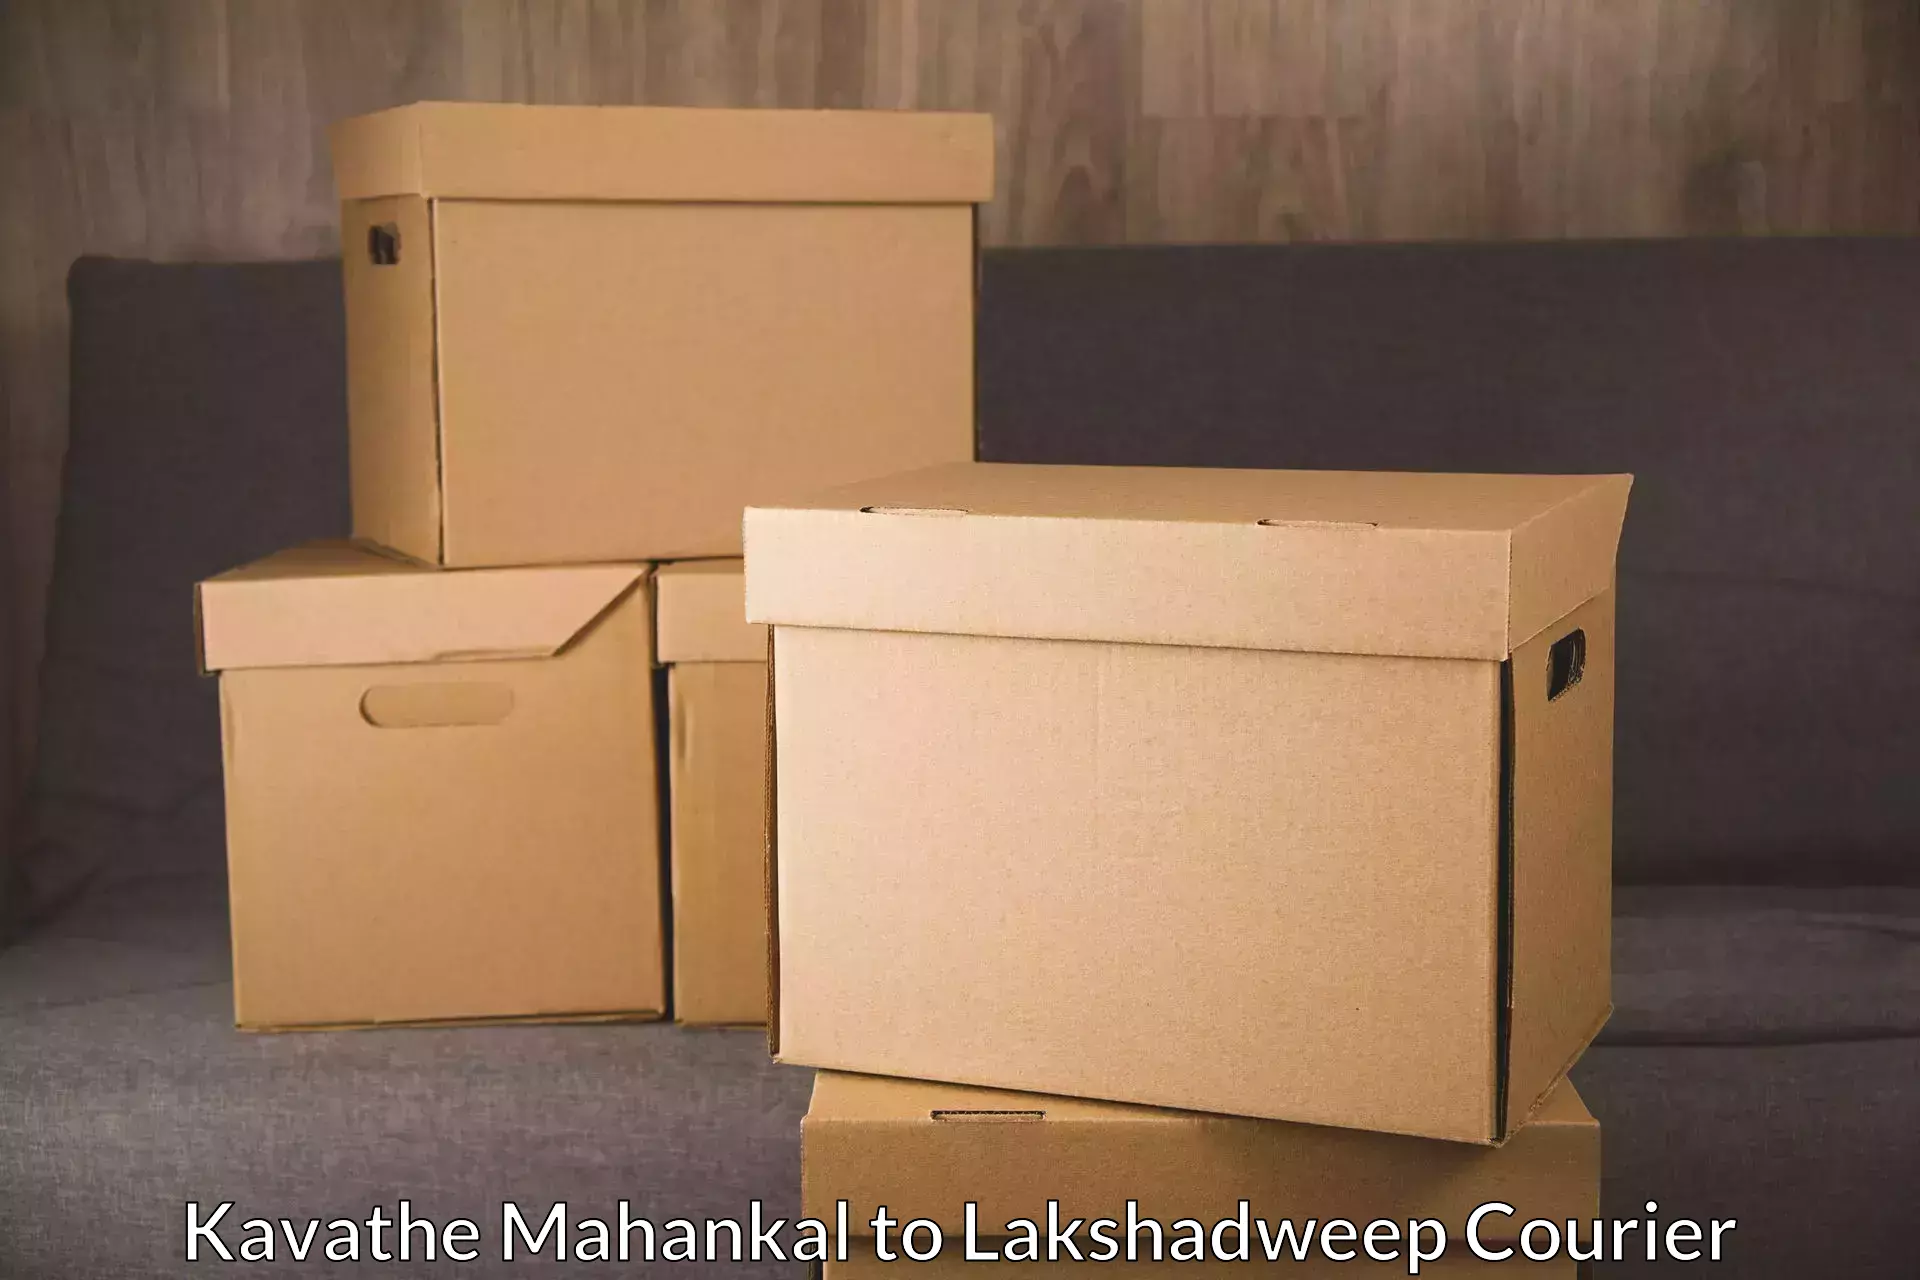 Cost-effective courier options Kavathe Mahankal to Lakshadweep